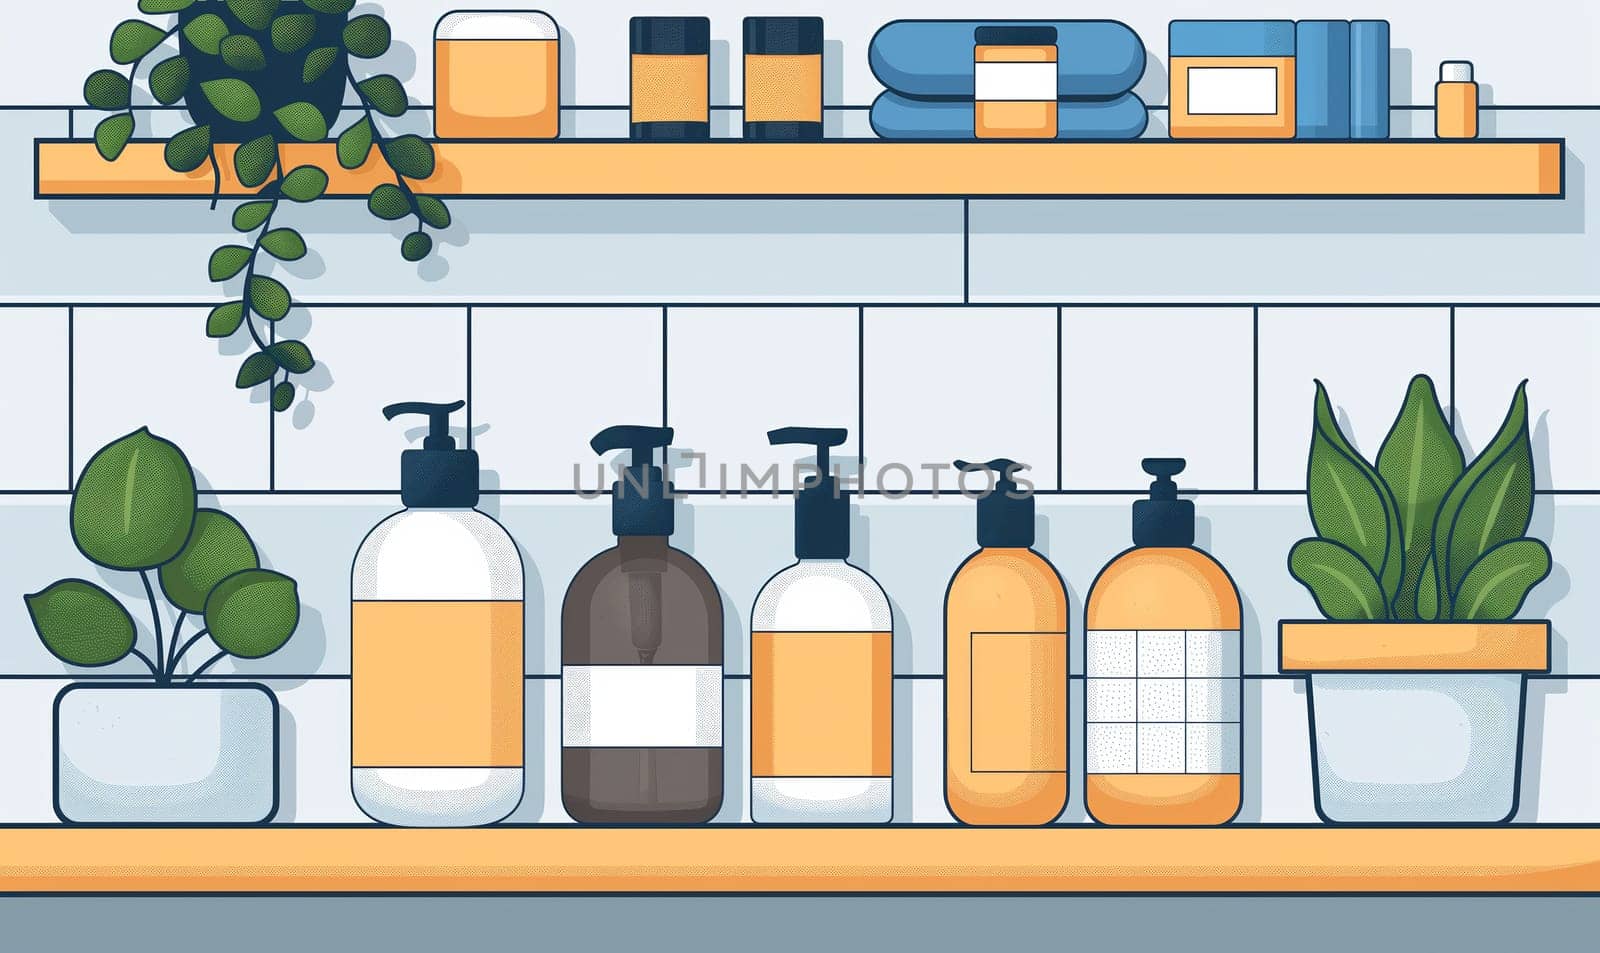 An illustration of various soap bottles. by Fischeron